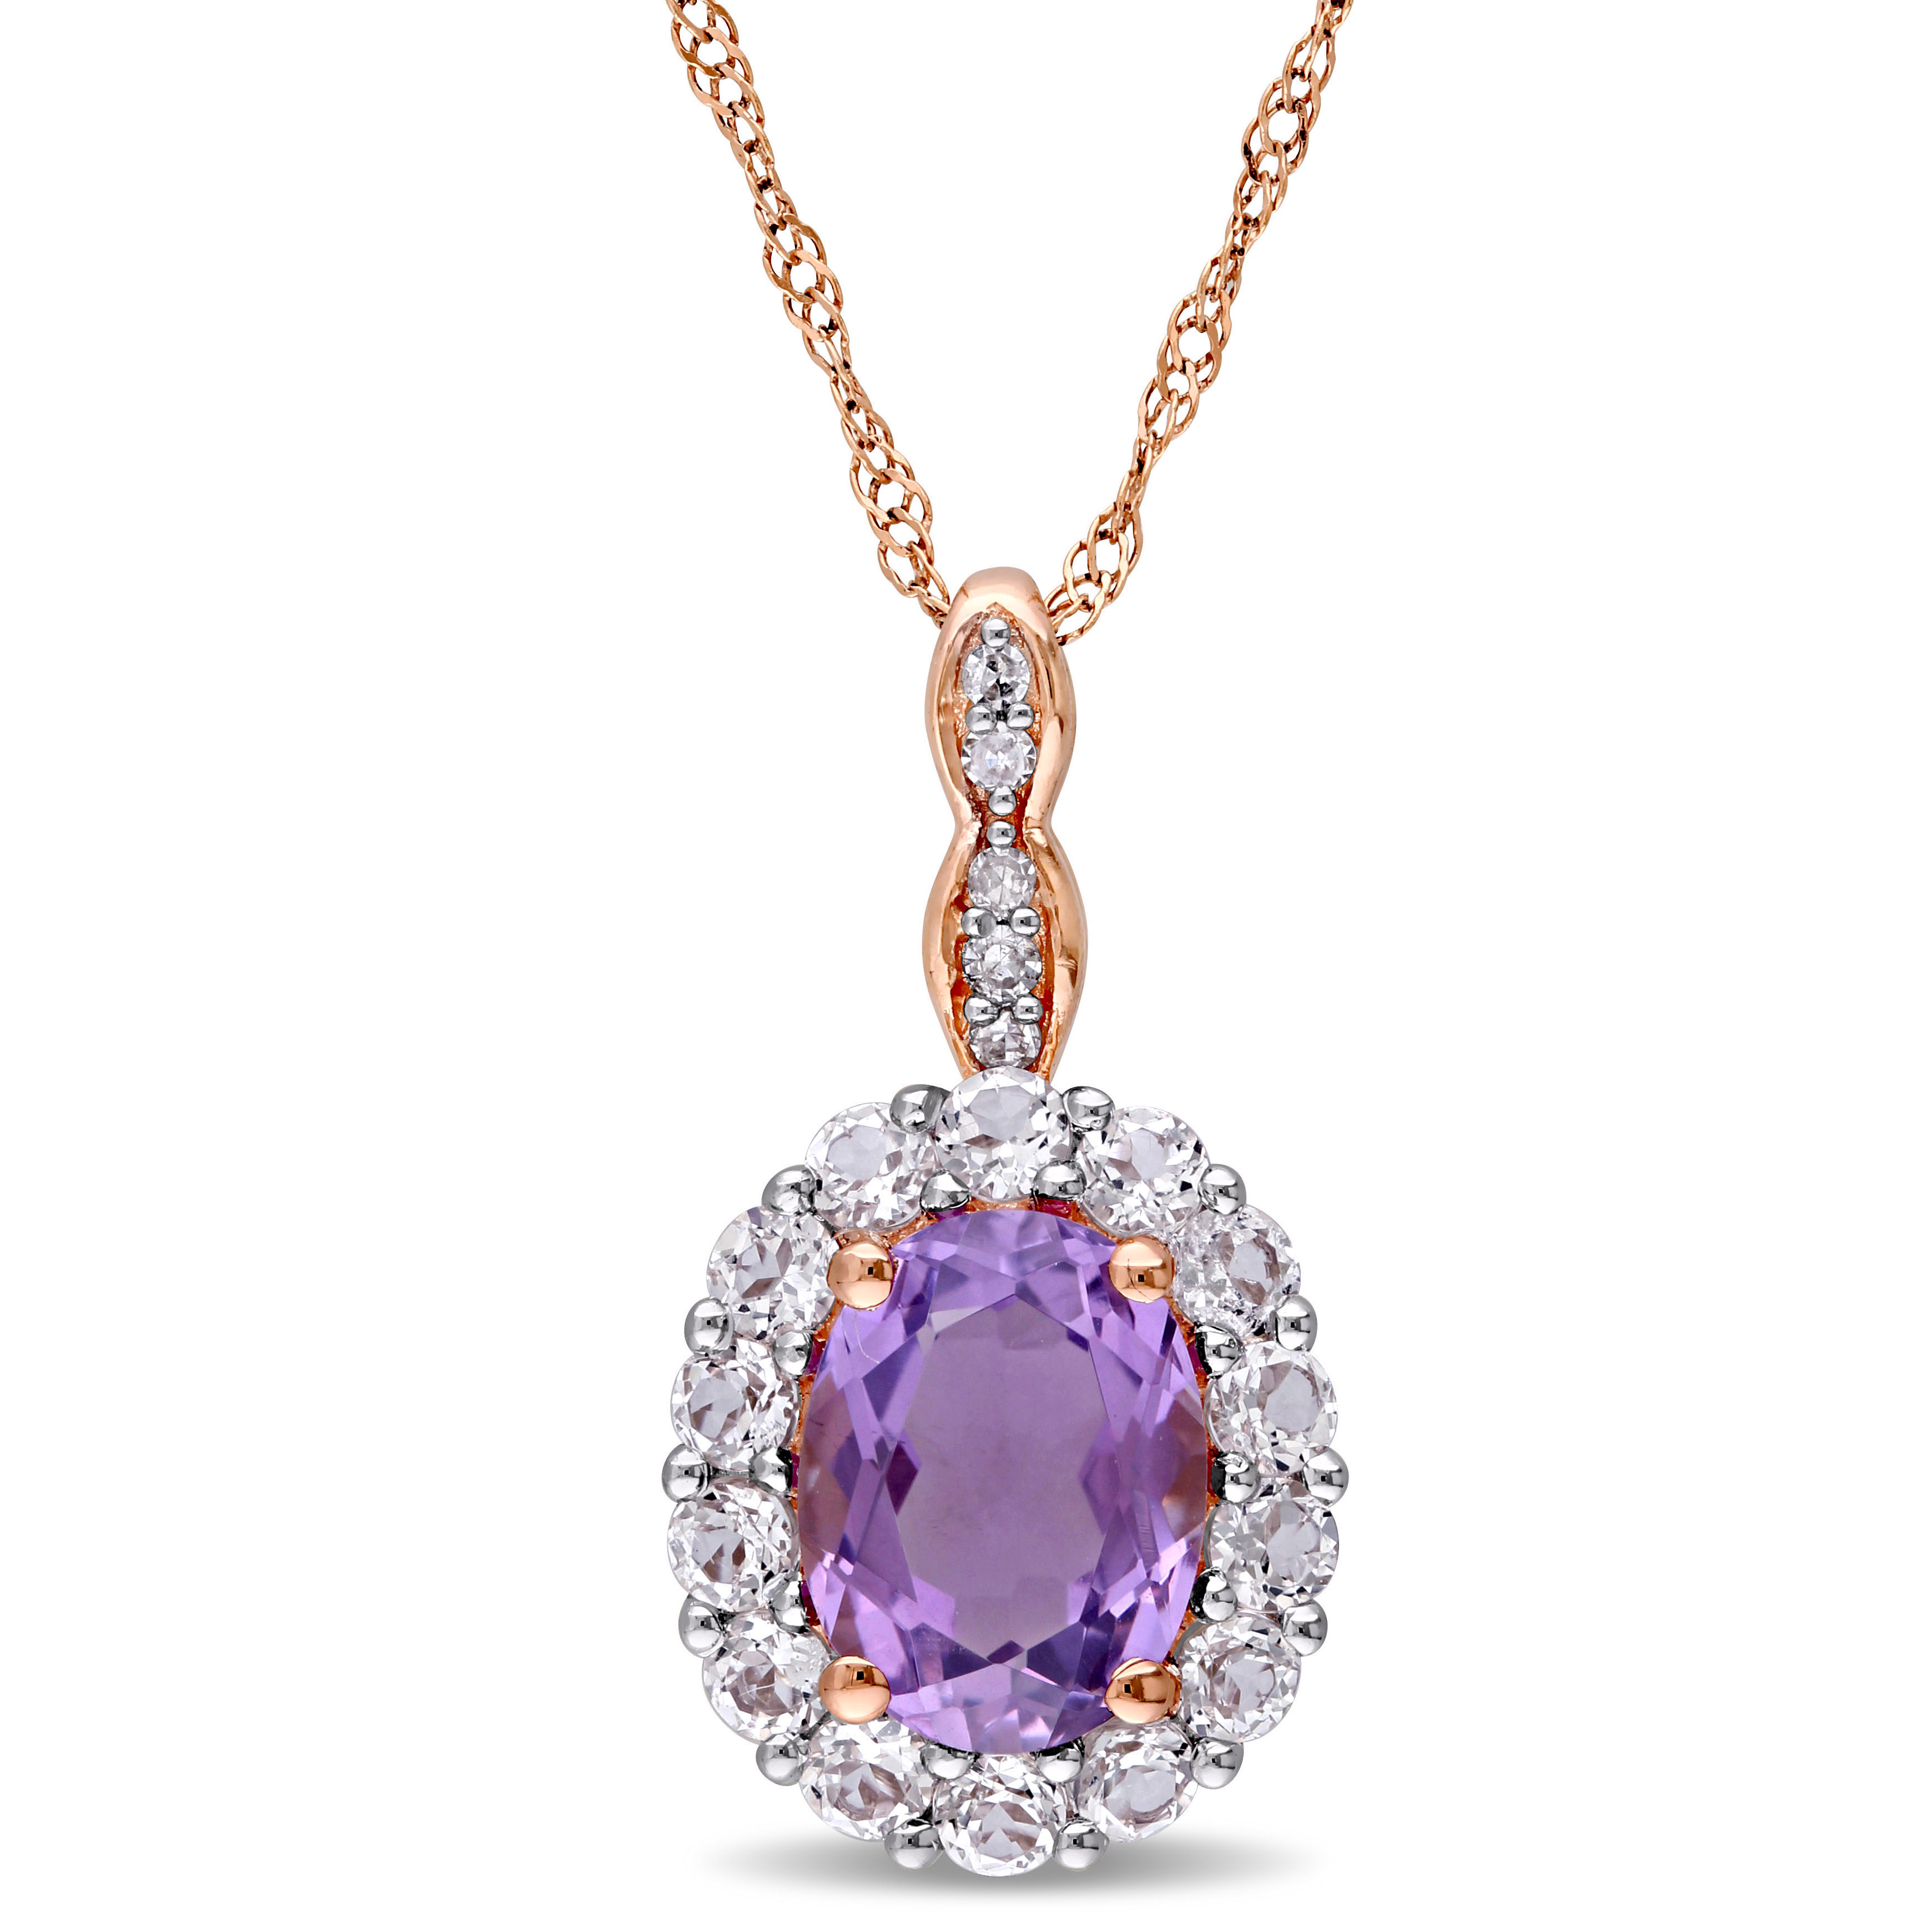 Oval Shape Amethyst, White Topaz, and Diamond Accent Vintage Pendant With Chain in 14k Rose Gold